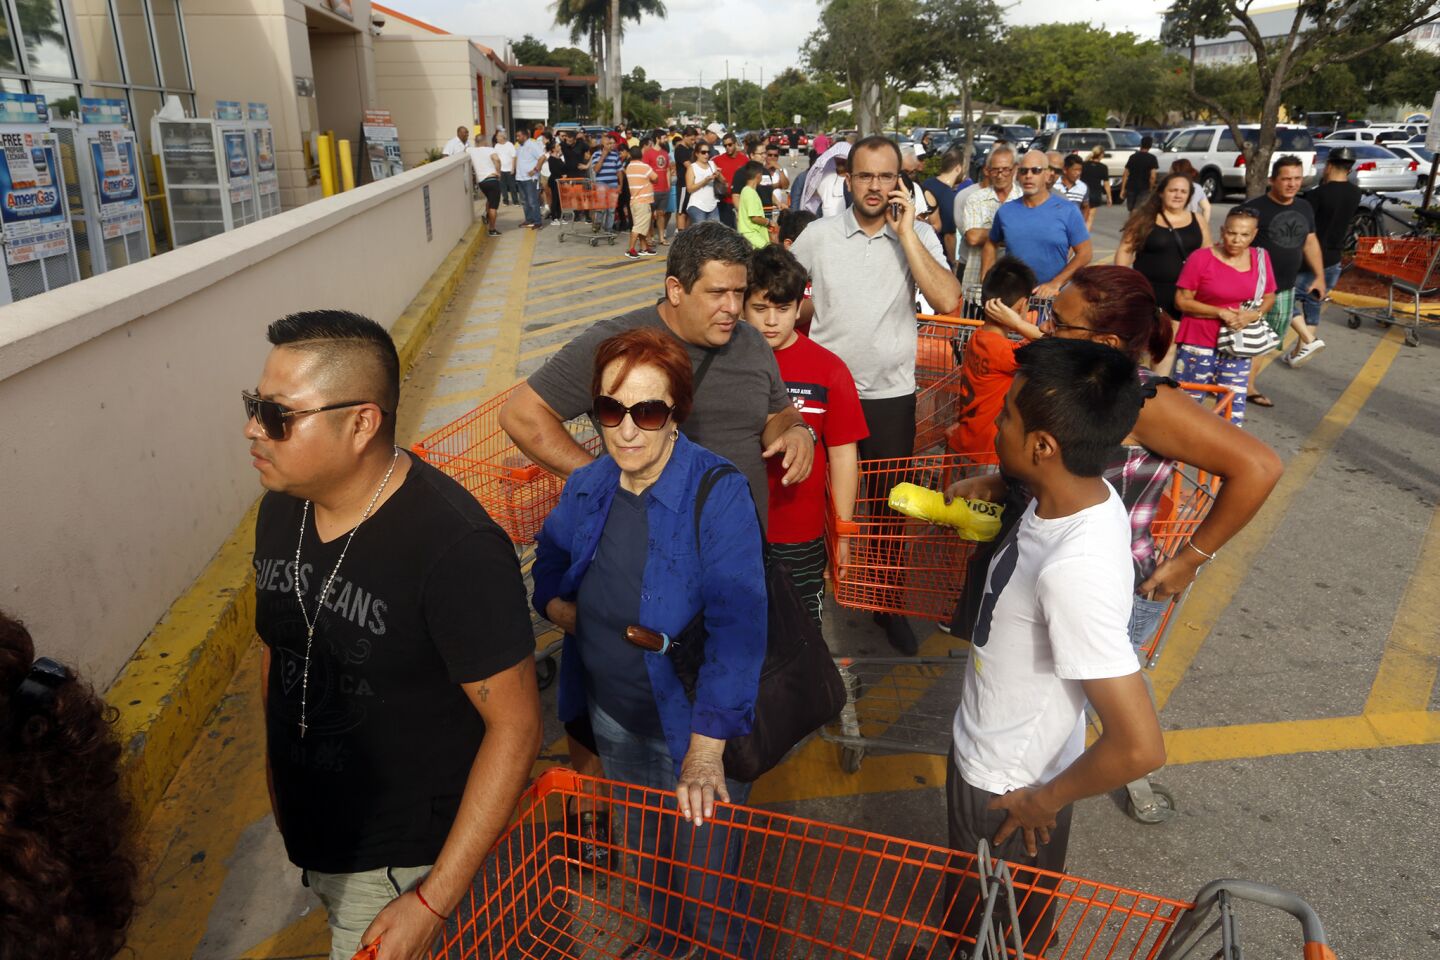 Hundreds wait in line on Friday at Home Depot in Miami to get supplies line sheets of plywood, and anything else they can find, to board up their homes. Police were on the scene to keep things orderly.